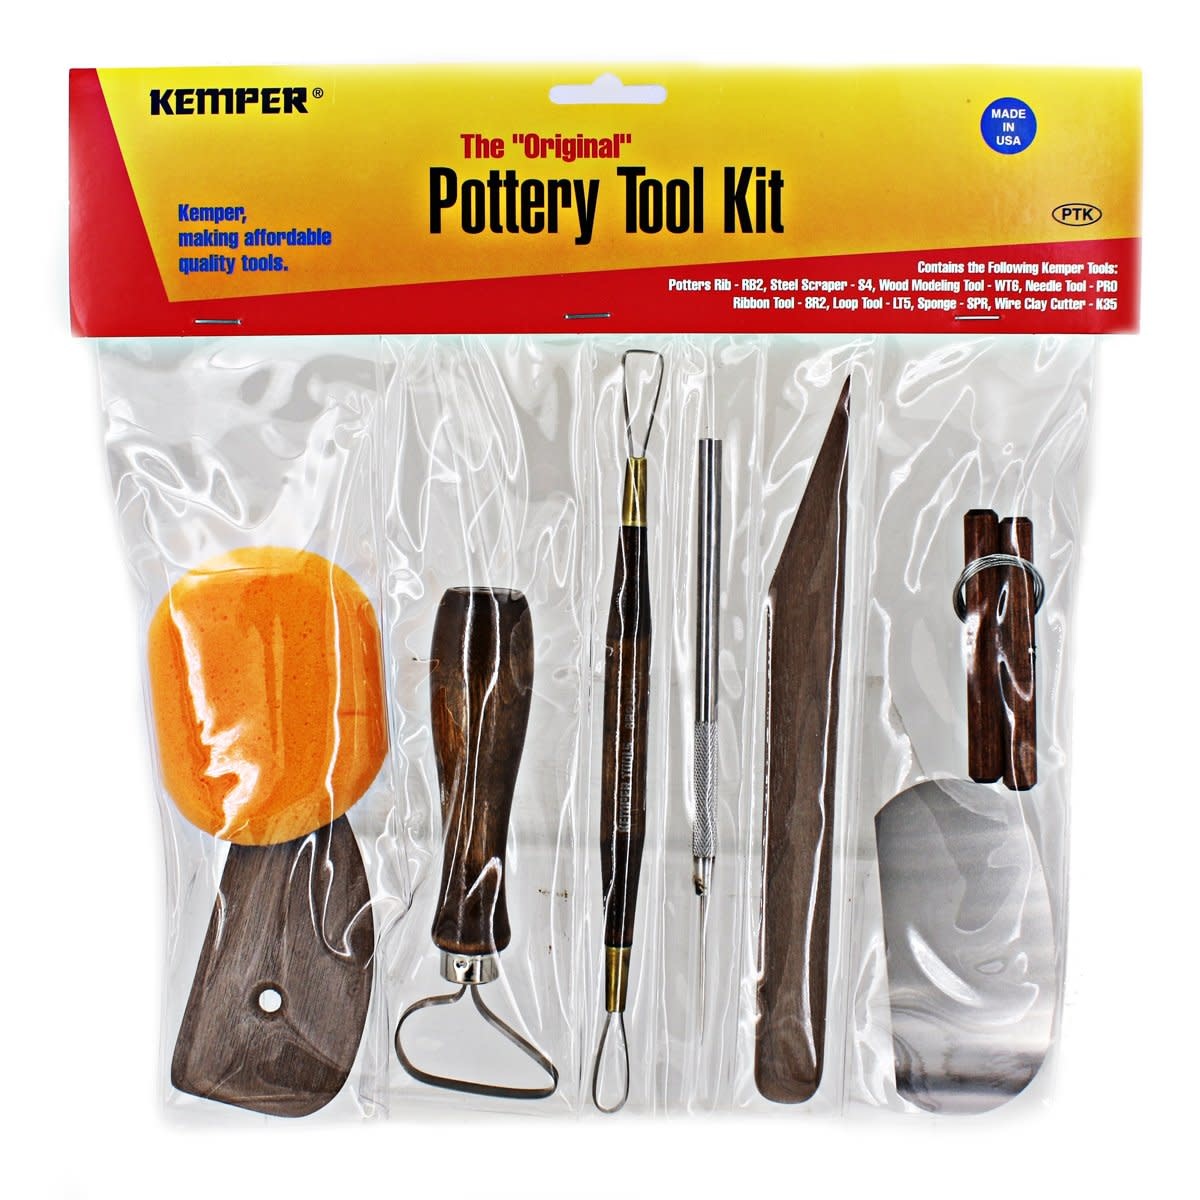 AT POTTERY TOOL KIT - 8 TOOLS - The Potter's Shop